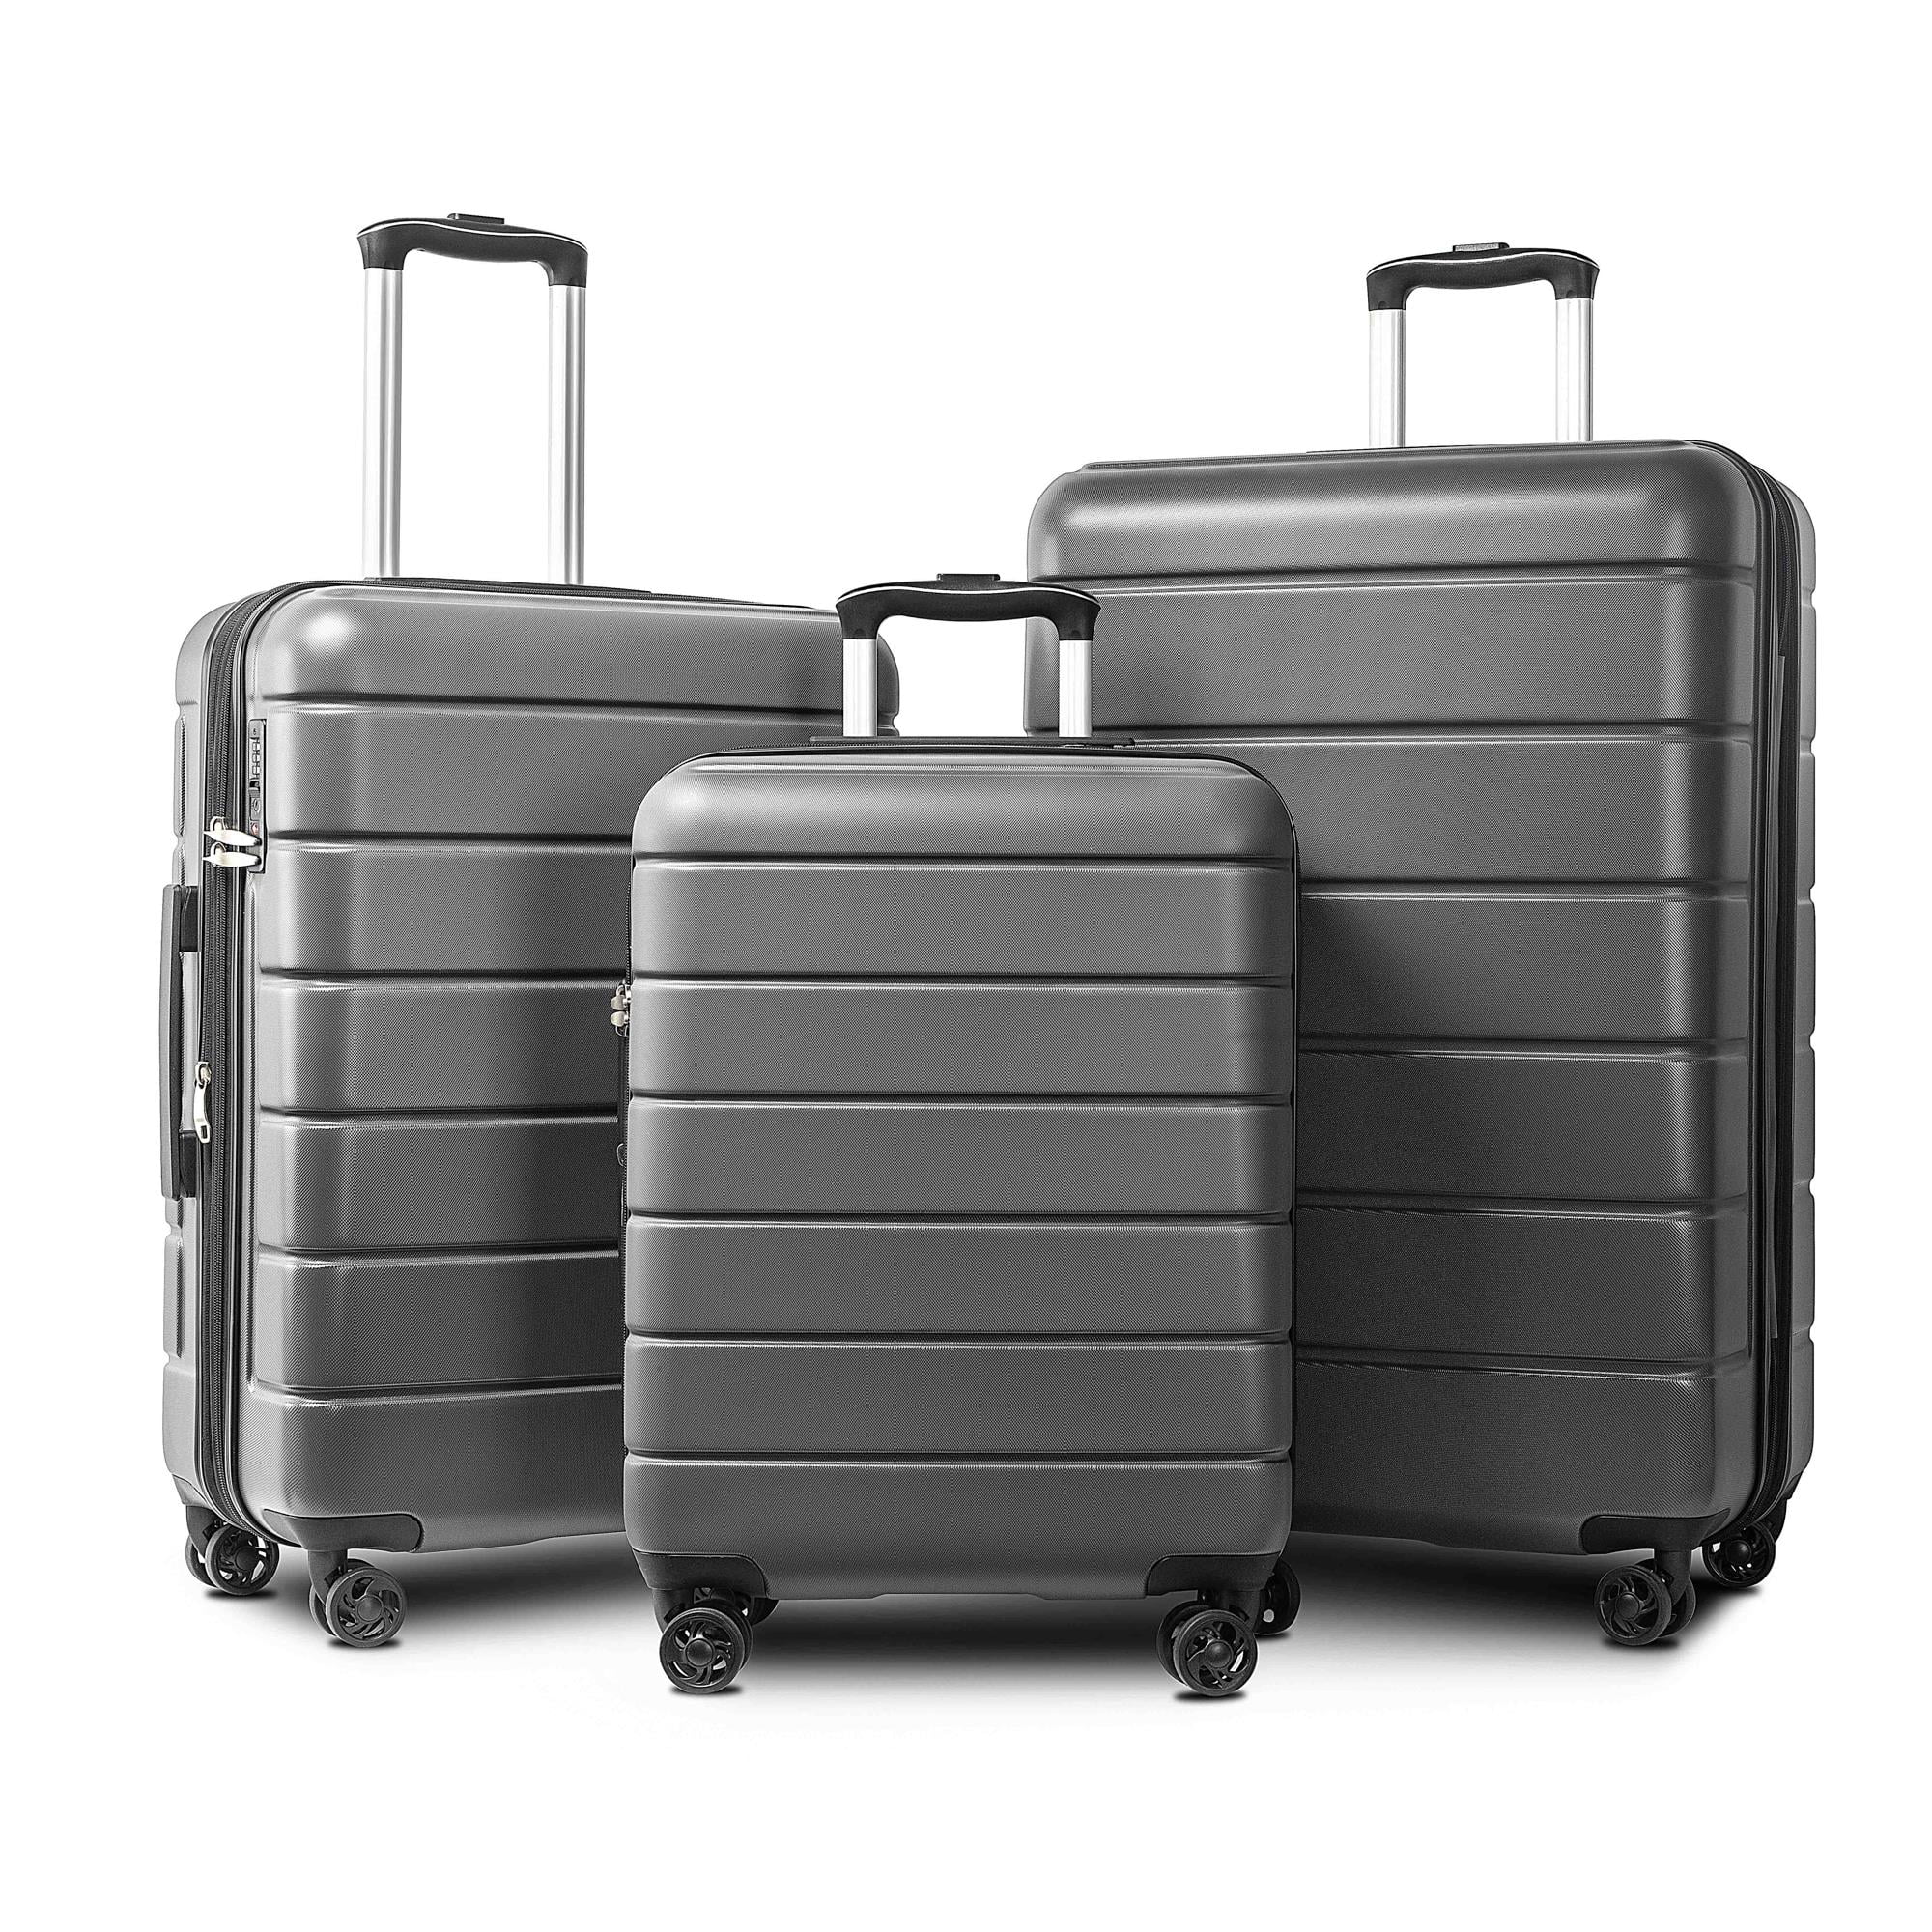 Buy Zimtown 3 Pieces Travel Luggage Set Bag ABS Trolley Carry On ...